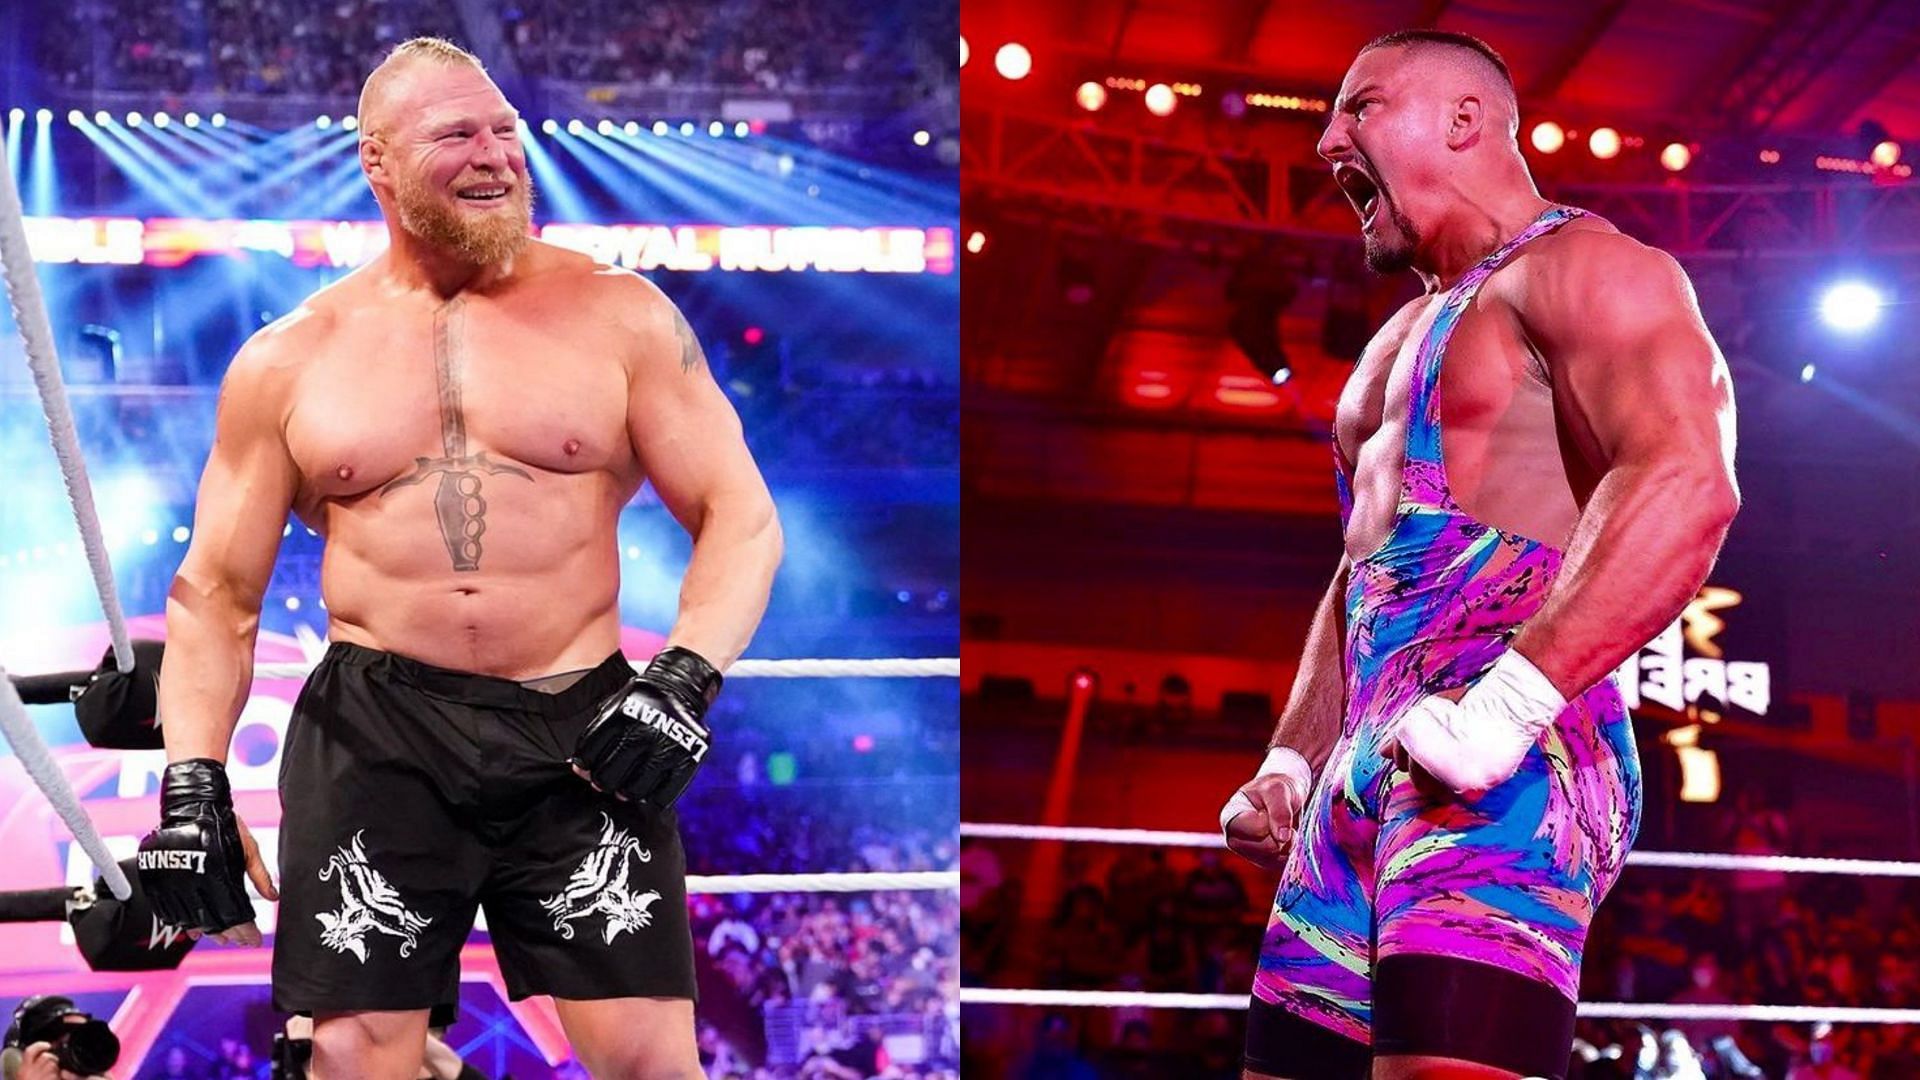 5 current WWE Superstars who want to face Brock Lesnar